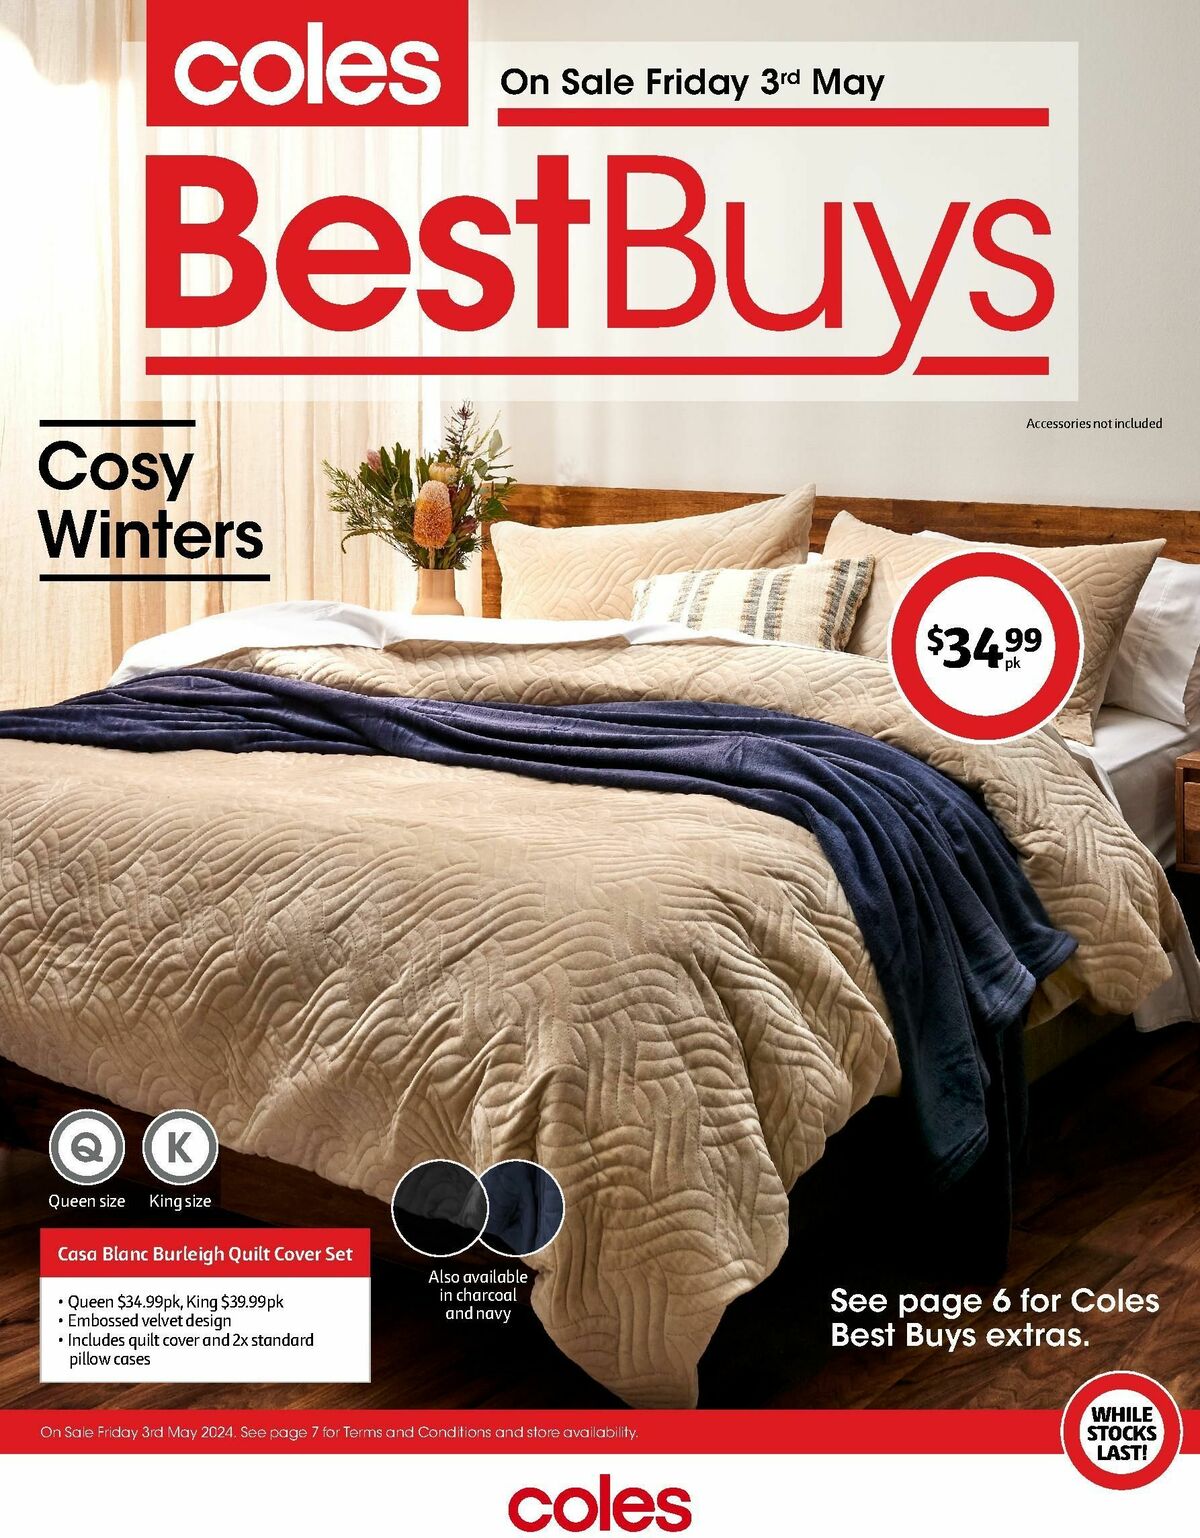 Coles Best Buys - Cosy Winters Catalogues from 3 May